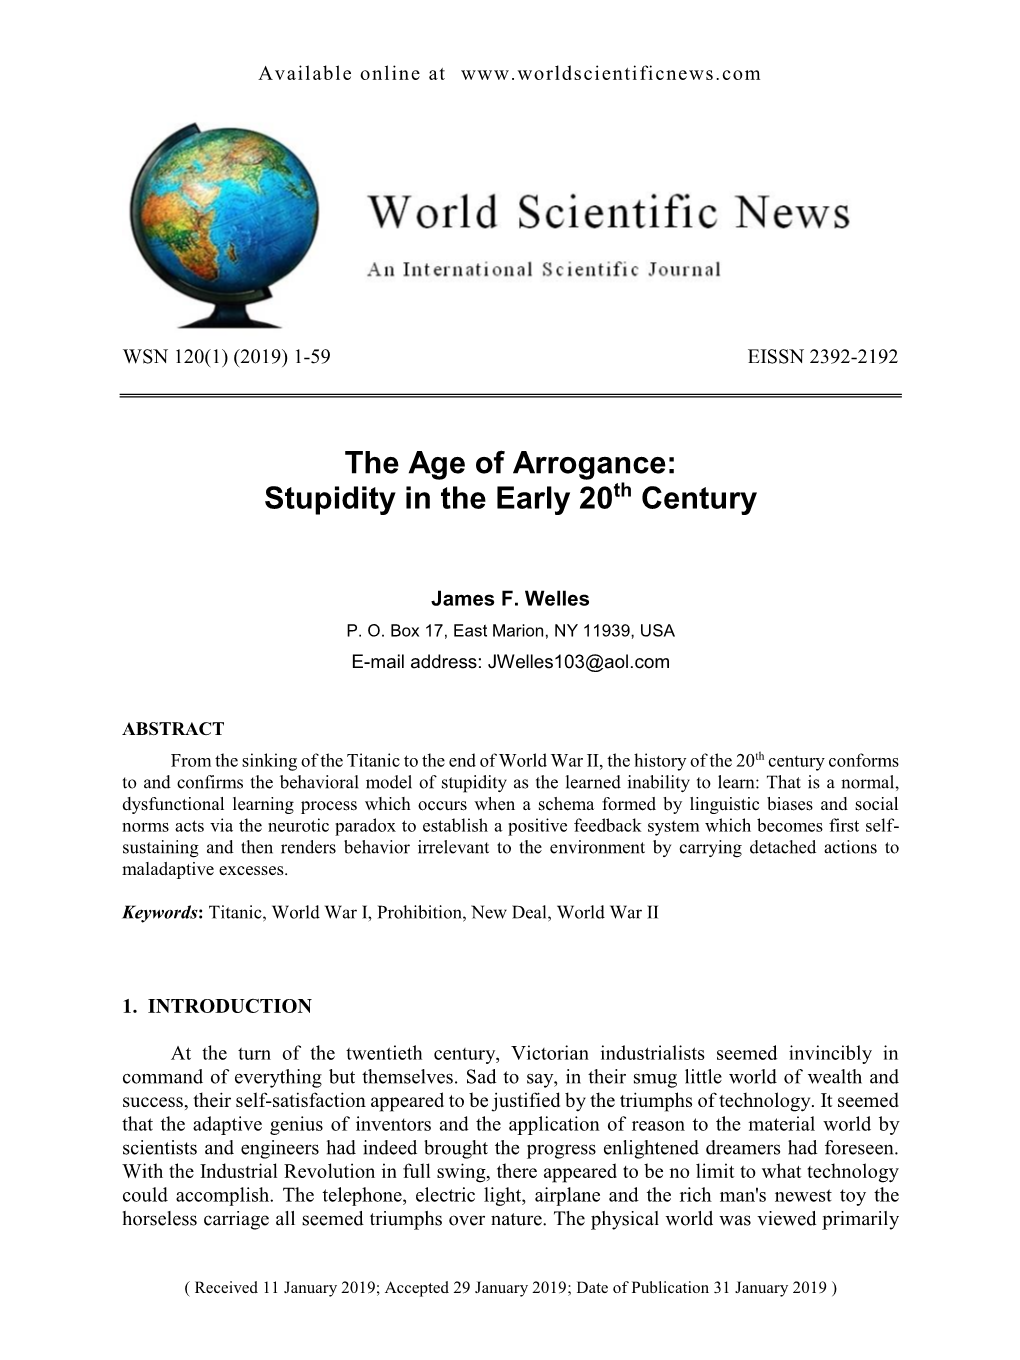 The Age of Arrogance: Stupidity in the Early 20Th Century